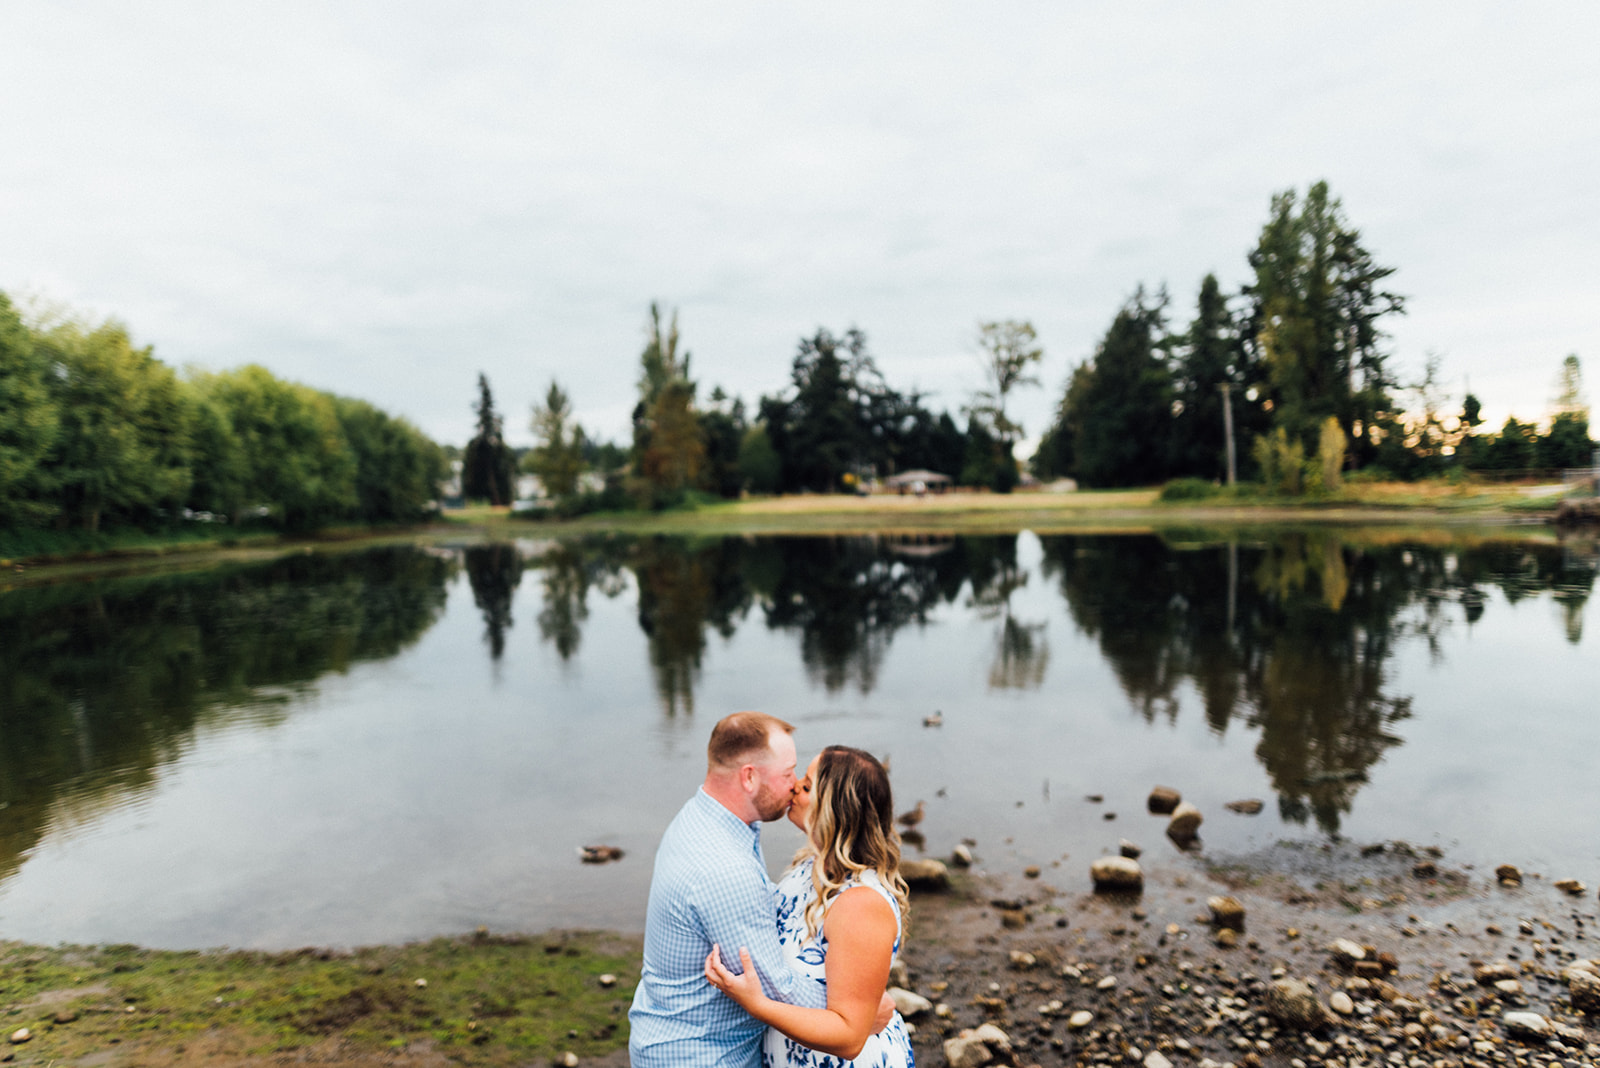 Titlow Beach and Boathouse 19 Engagement